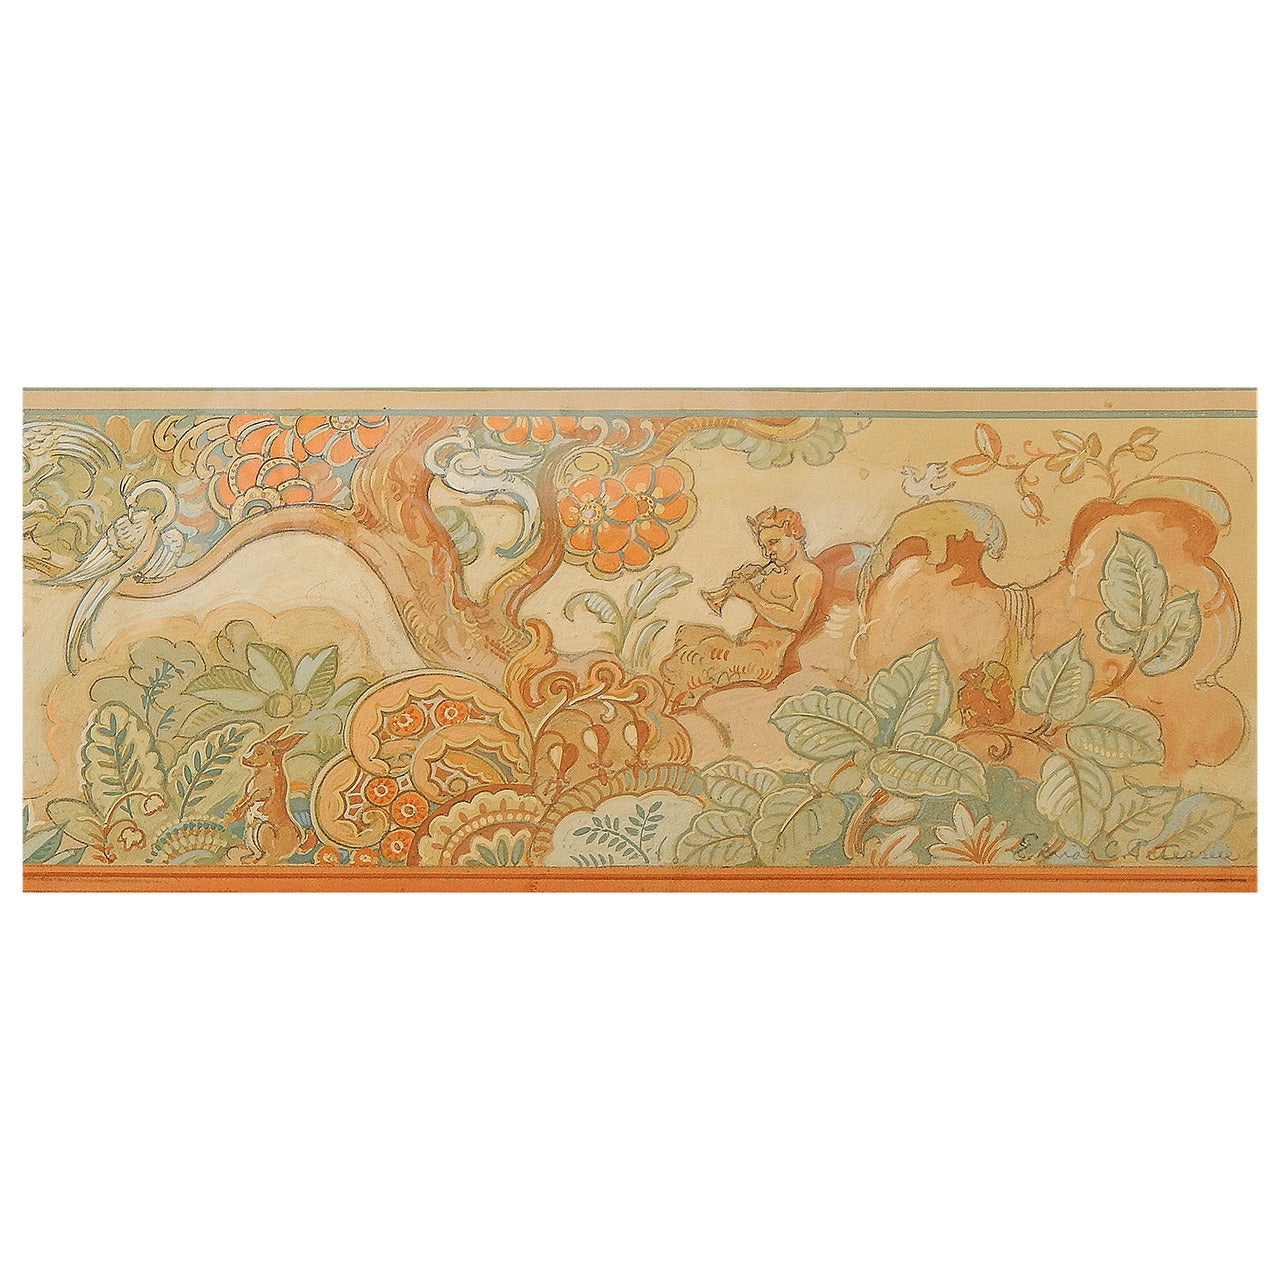 "Pan in Paradise, " Superb Art Deco Mural Study by Petersen For Sale